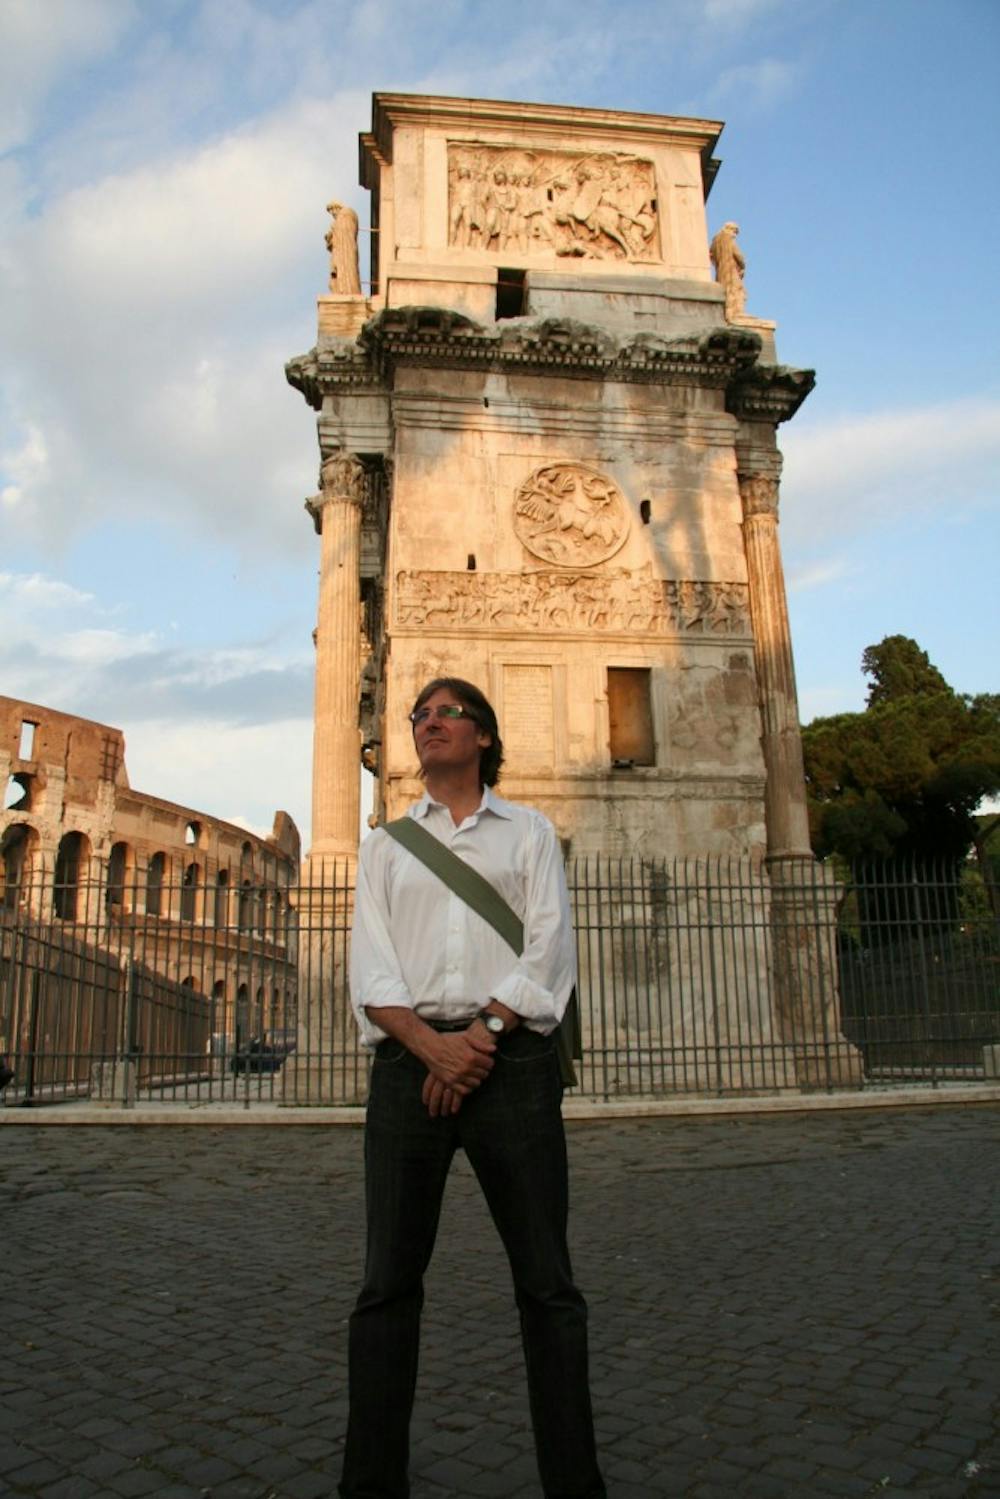 <p>The Arch of Constantine stands in Rome. A new architectural master's program at IU will combine architecture with art principles, said T. Kelly Wilson, director of graduate studies in architecture.&nbsp;</p>